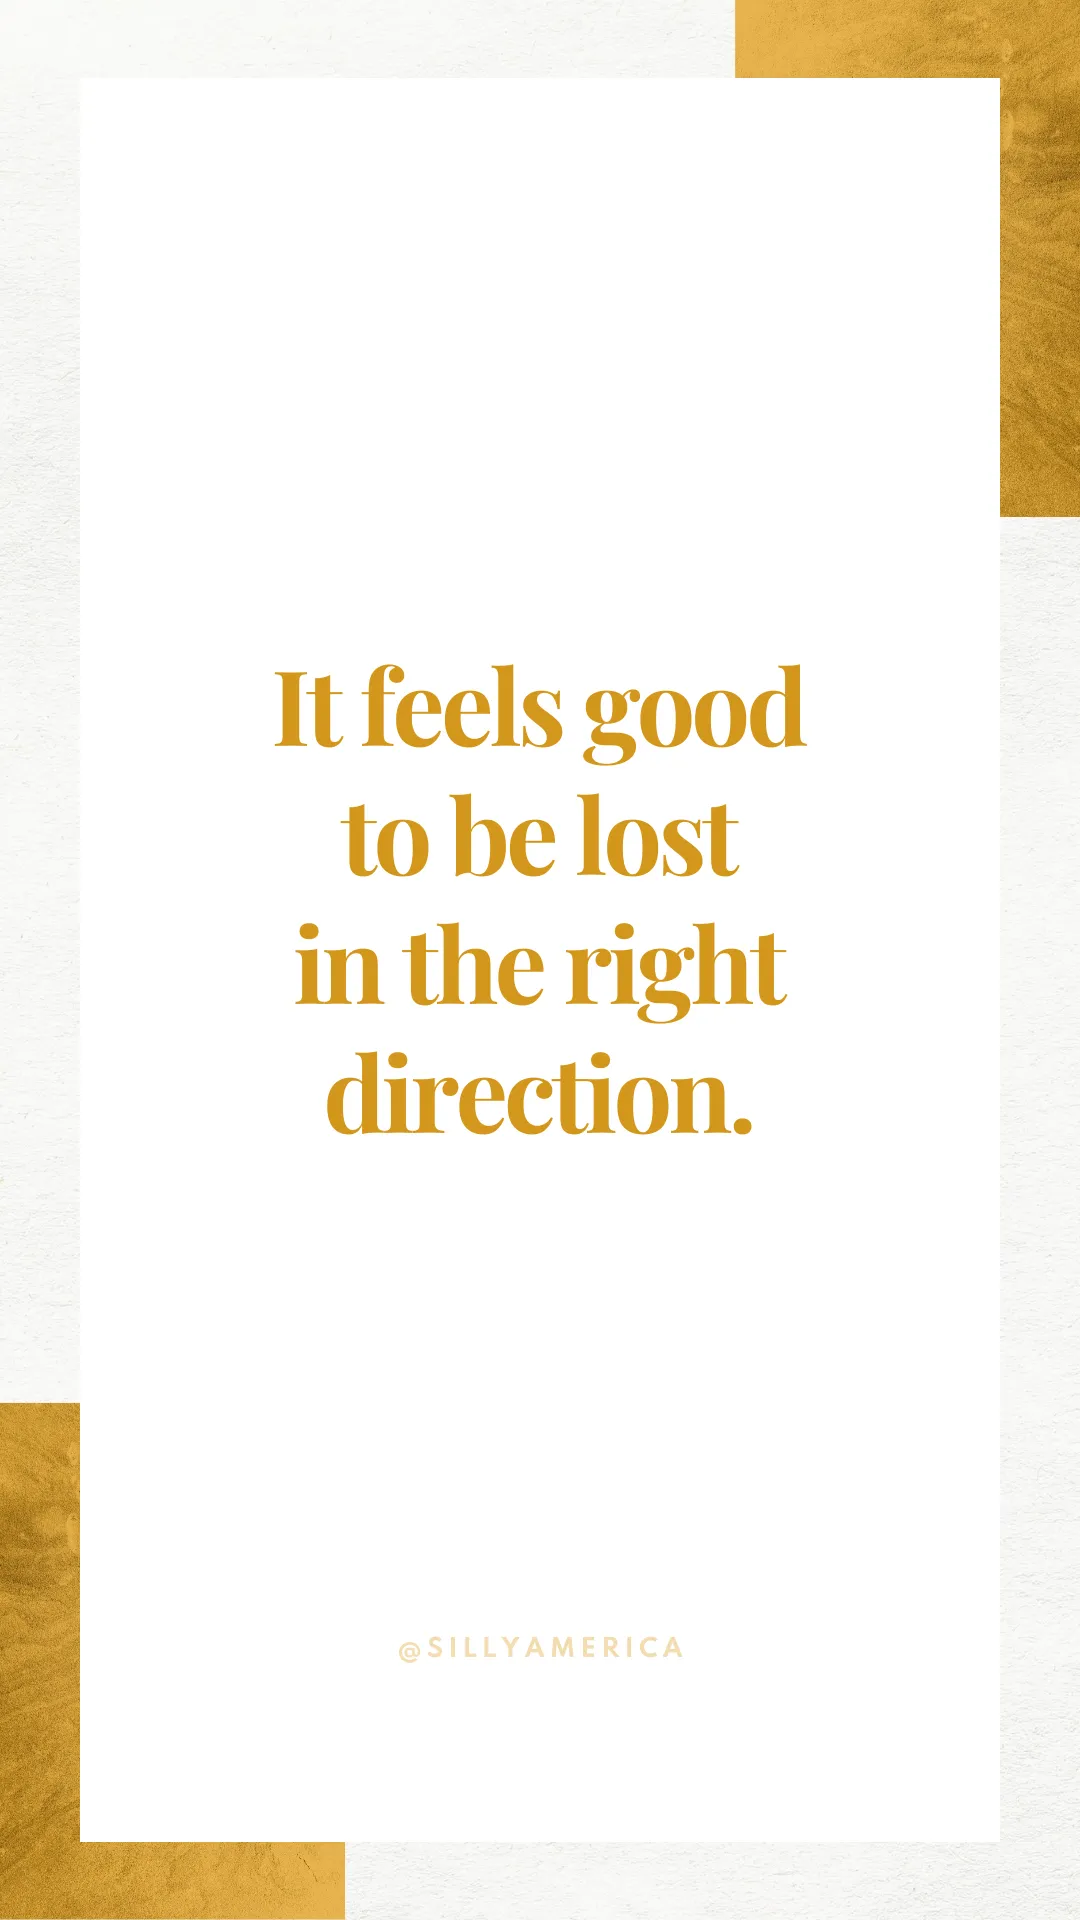 It feels good to be lost in the right direction. - Road Trip Captions for Instagram